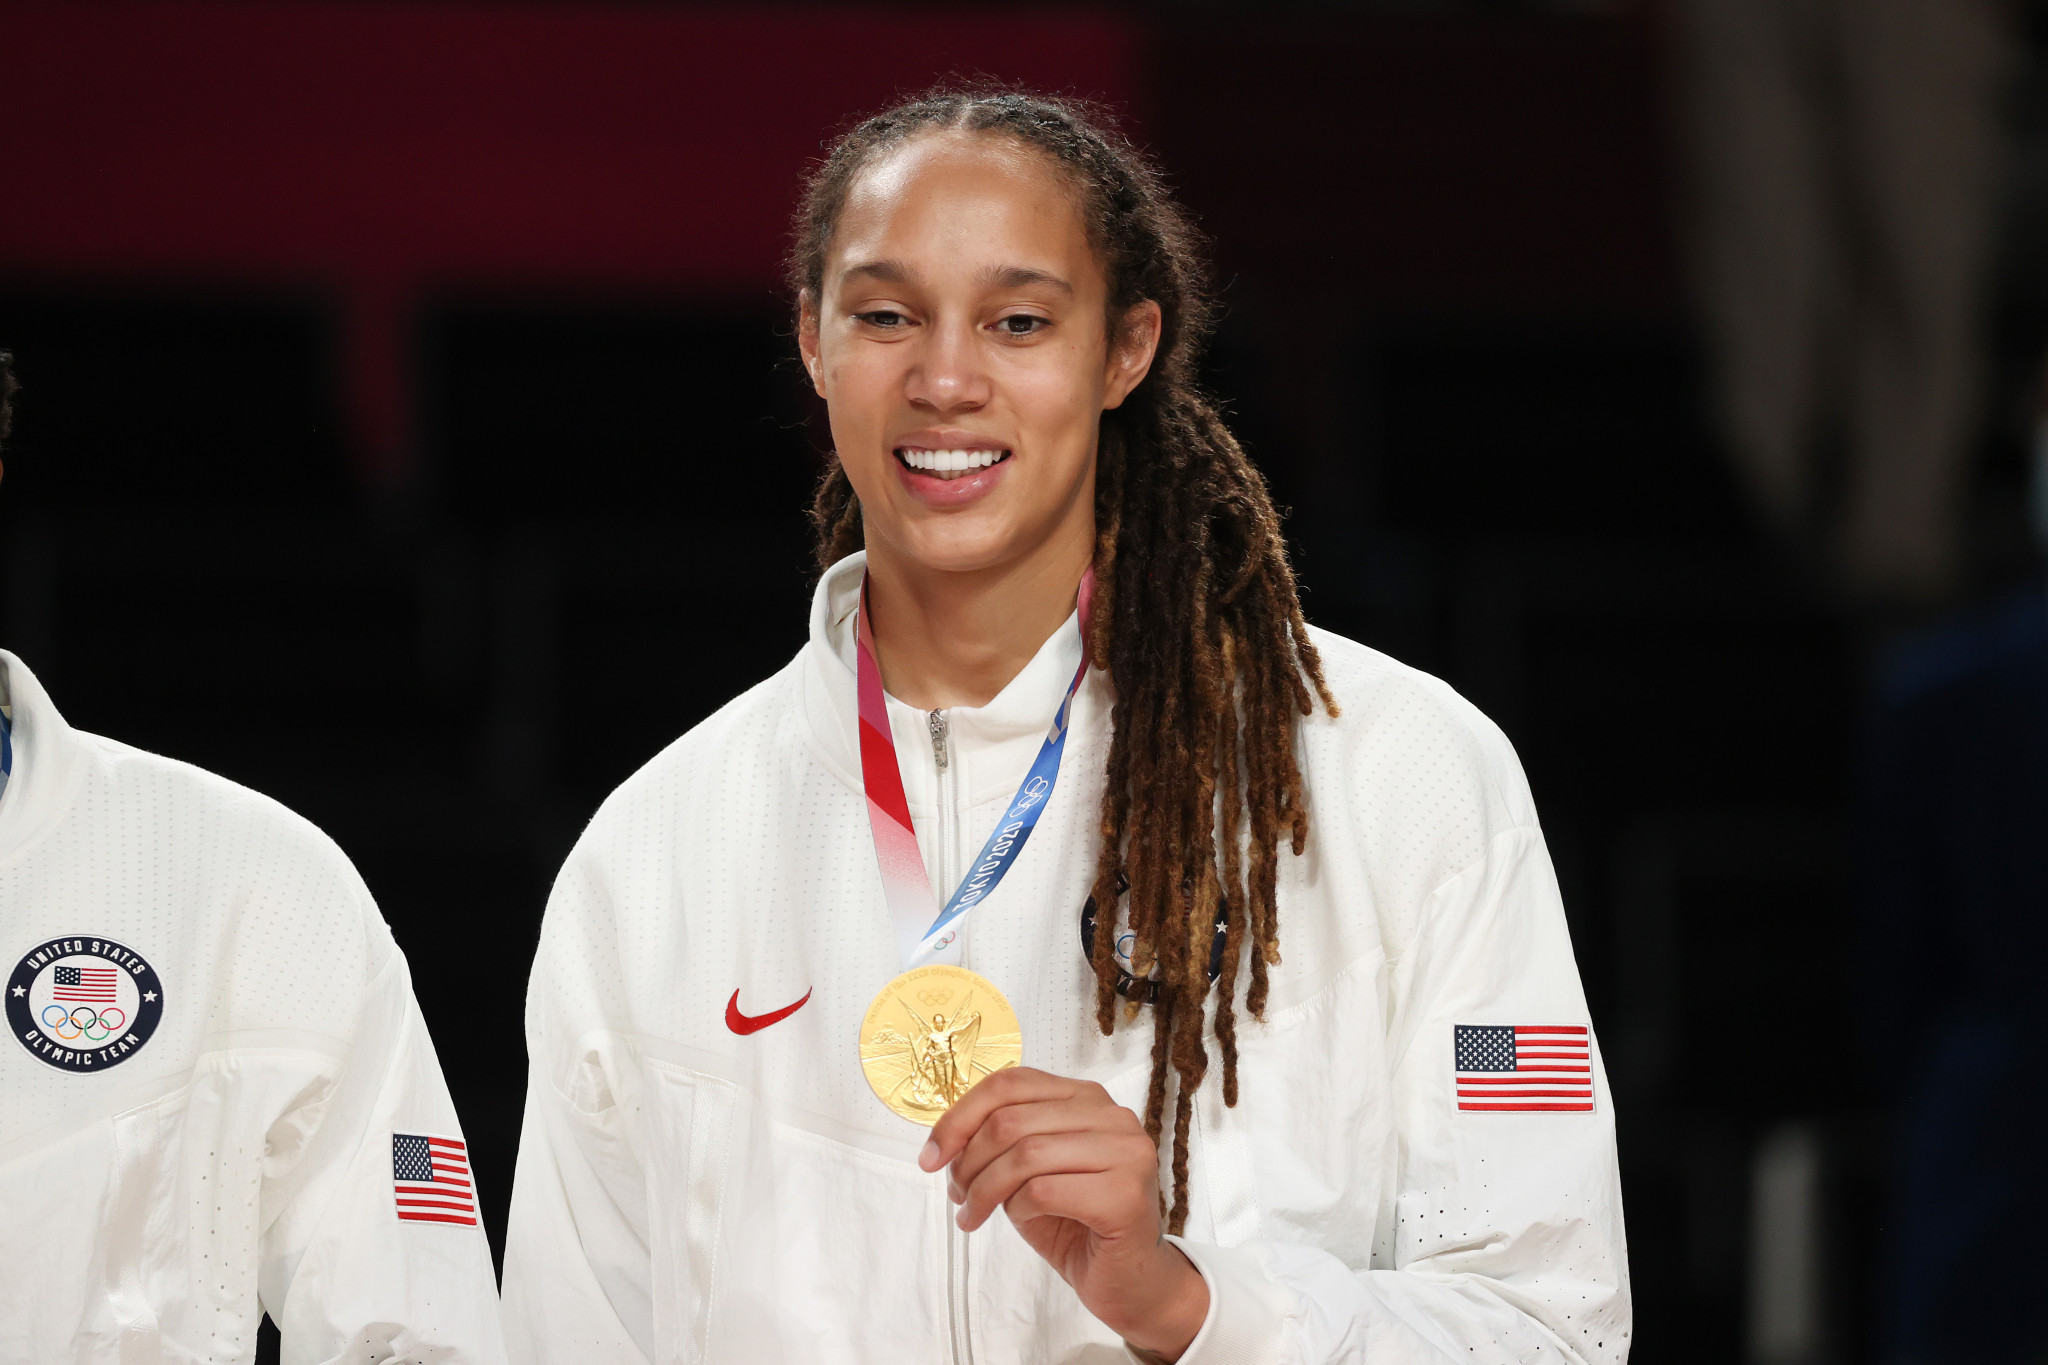 Brittney Griner would be playing for a third Olympic gold medal if she competes at Paris 2024 after success at Rio 2016 and Tokyo 2020 ©Getty Images